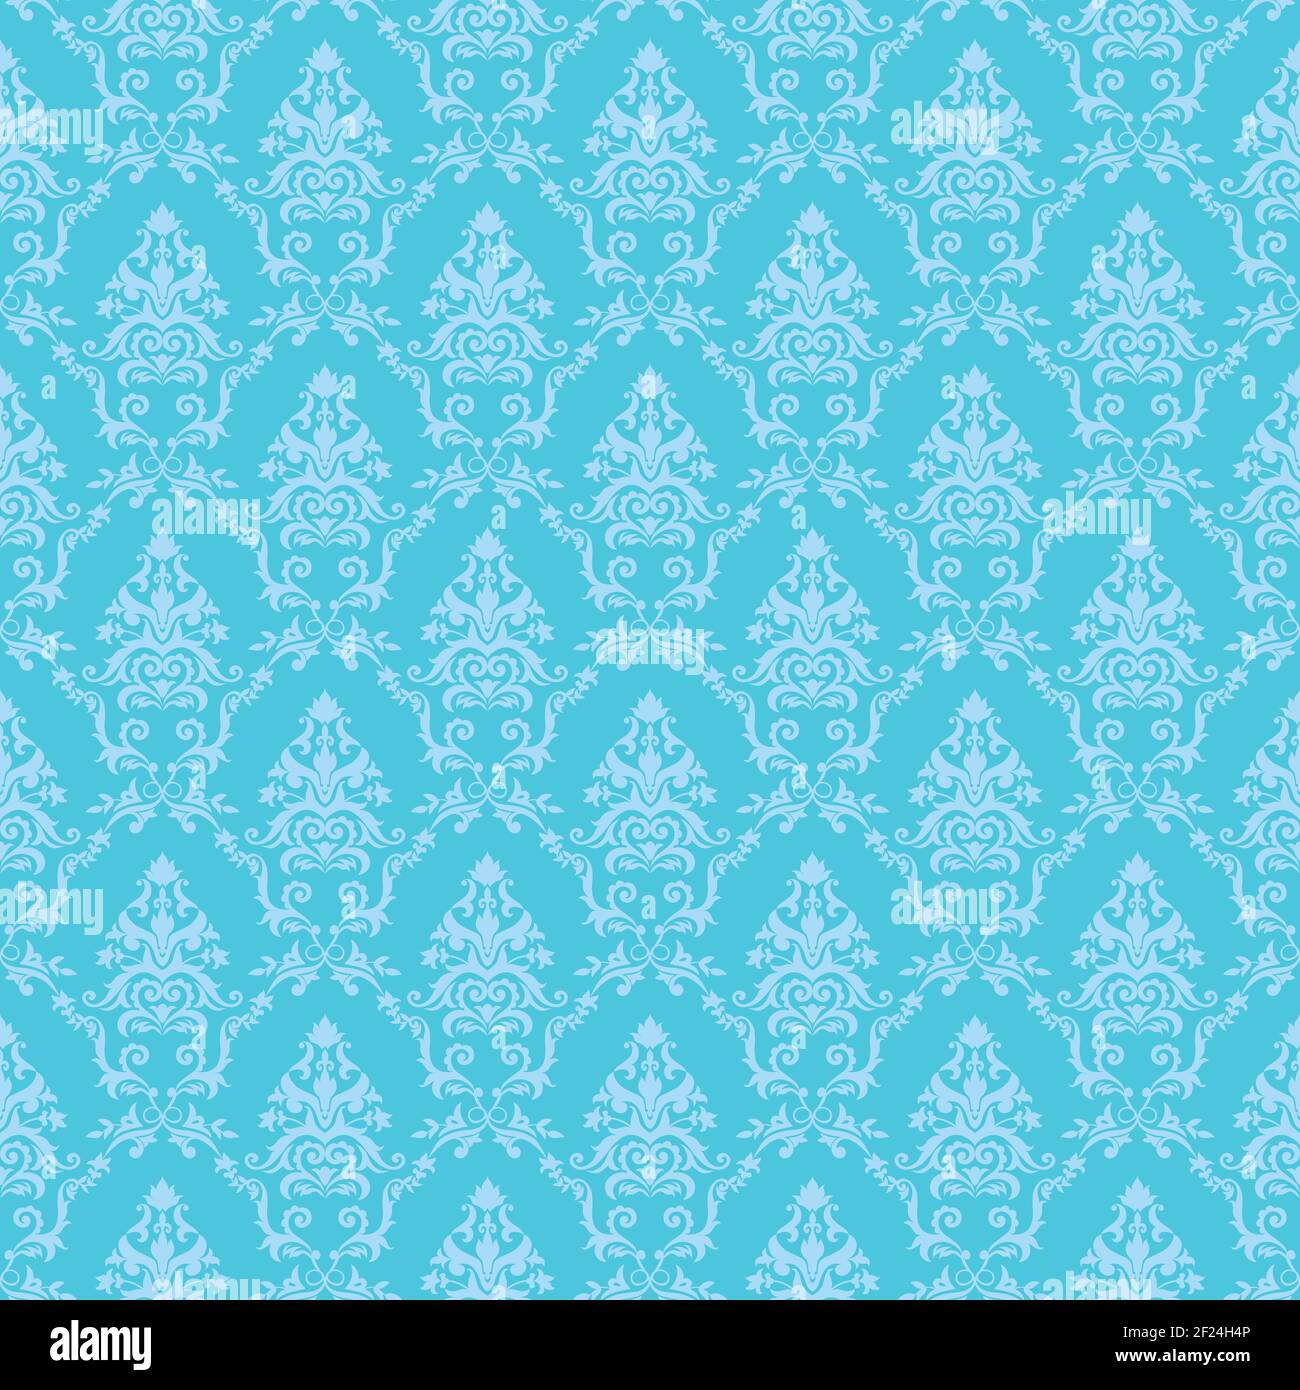 Vintage damask vector seamless pattern for bed cover,textile,cushion cover,phone case, home decor,fabric,home furnishings, wallpaper,curtain,tiles,etc Stock Vector